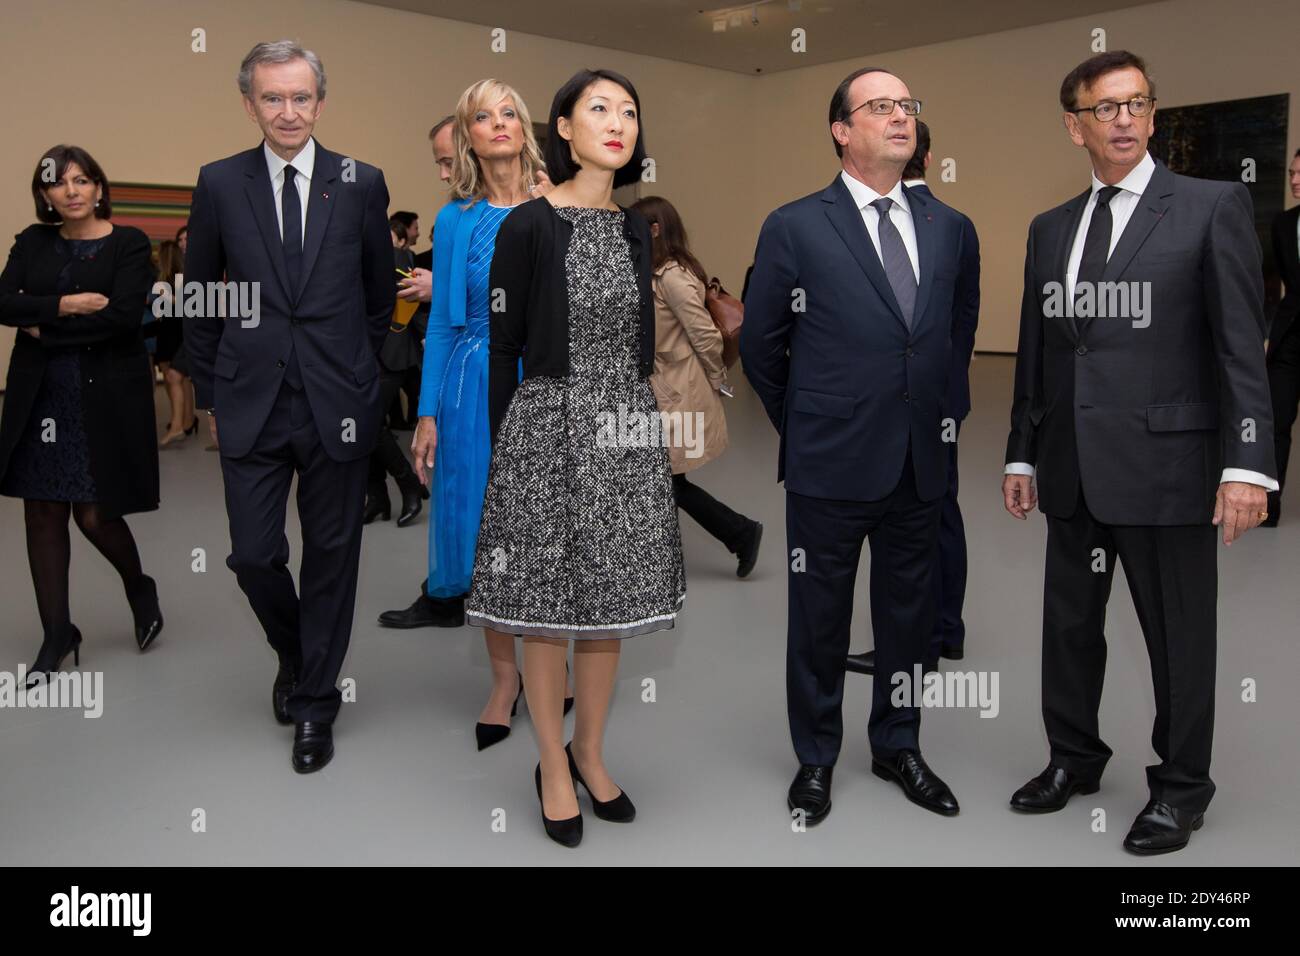 Left to right: Bernard Arnault and his wife Helene Mercier, French actor  Jean Reno and his fiancee Zofia Borucka, Antoine Arnault and Kate Hudson  attend the Christian Dior's Fall-Winter 2006-2007 Ready-to-Wear collection